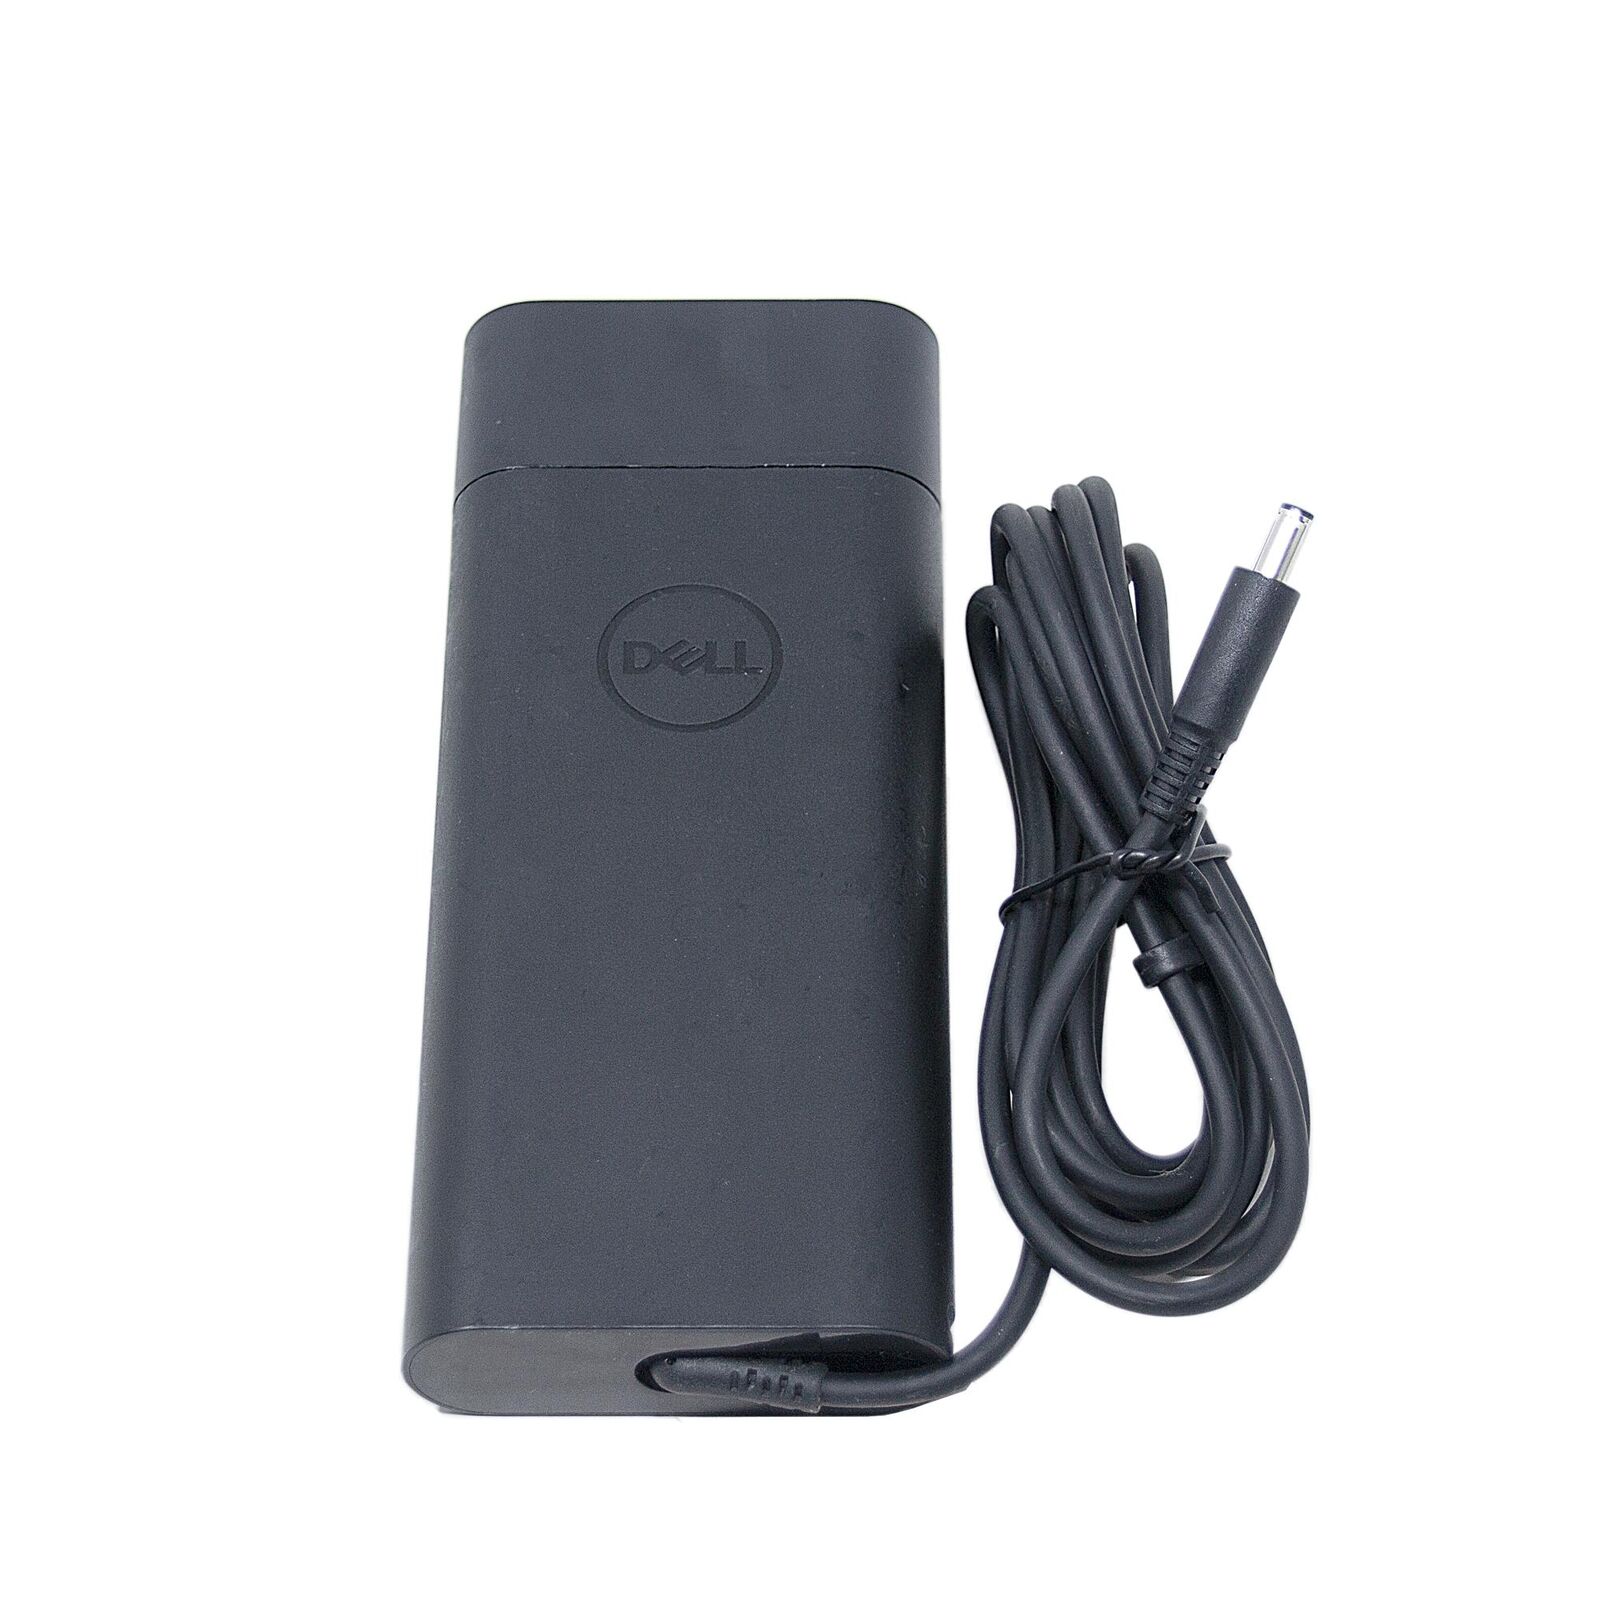 DELL Inspiron 24 5000 5459 W12C 90W Genuine Original AC Power Adapter Charger